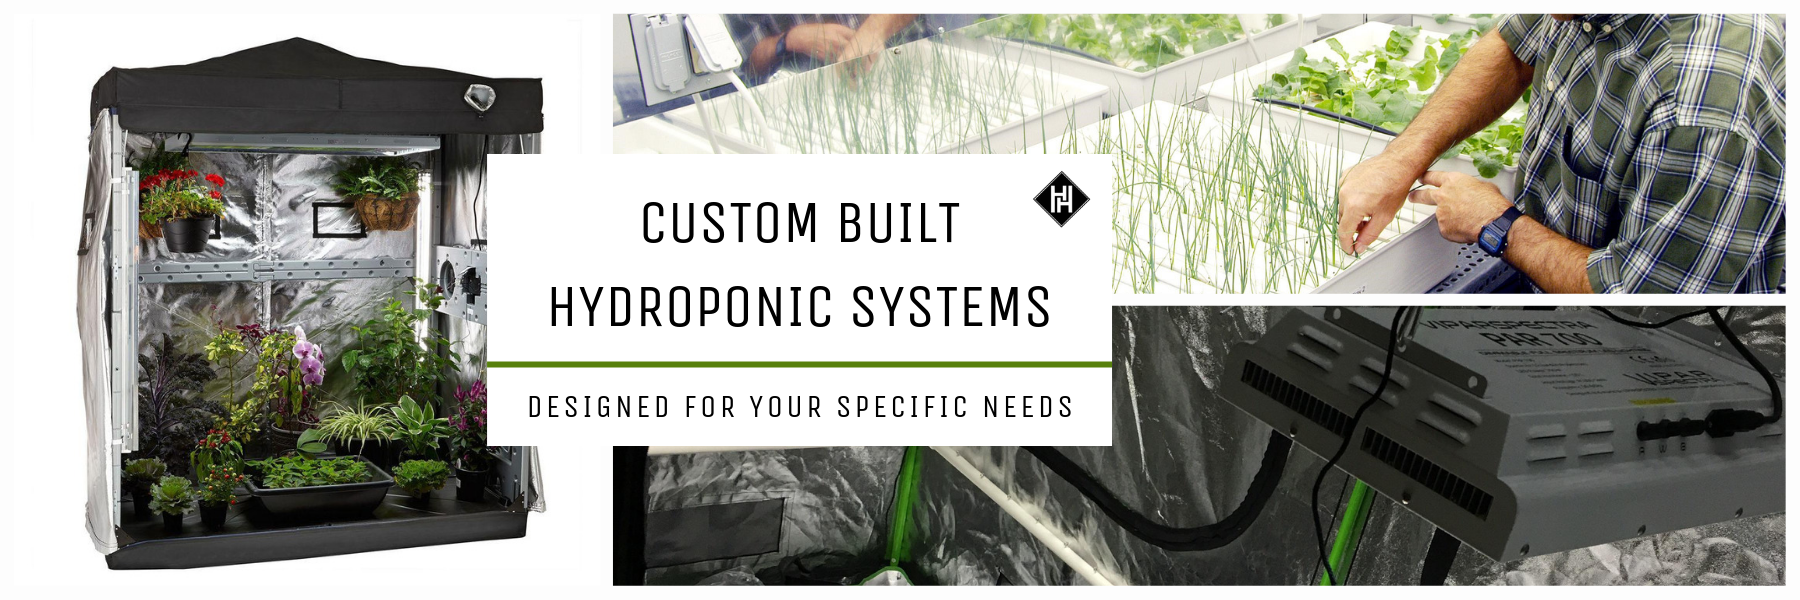 Hydroponic Systems & Supplies - Custom Built